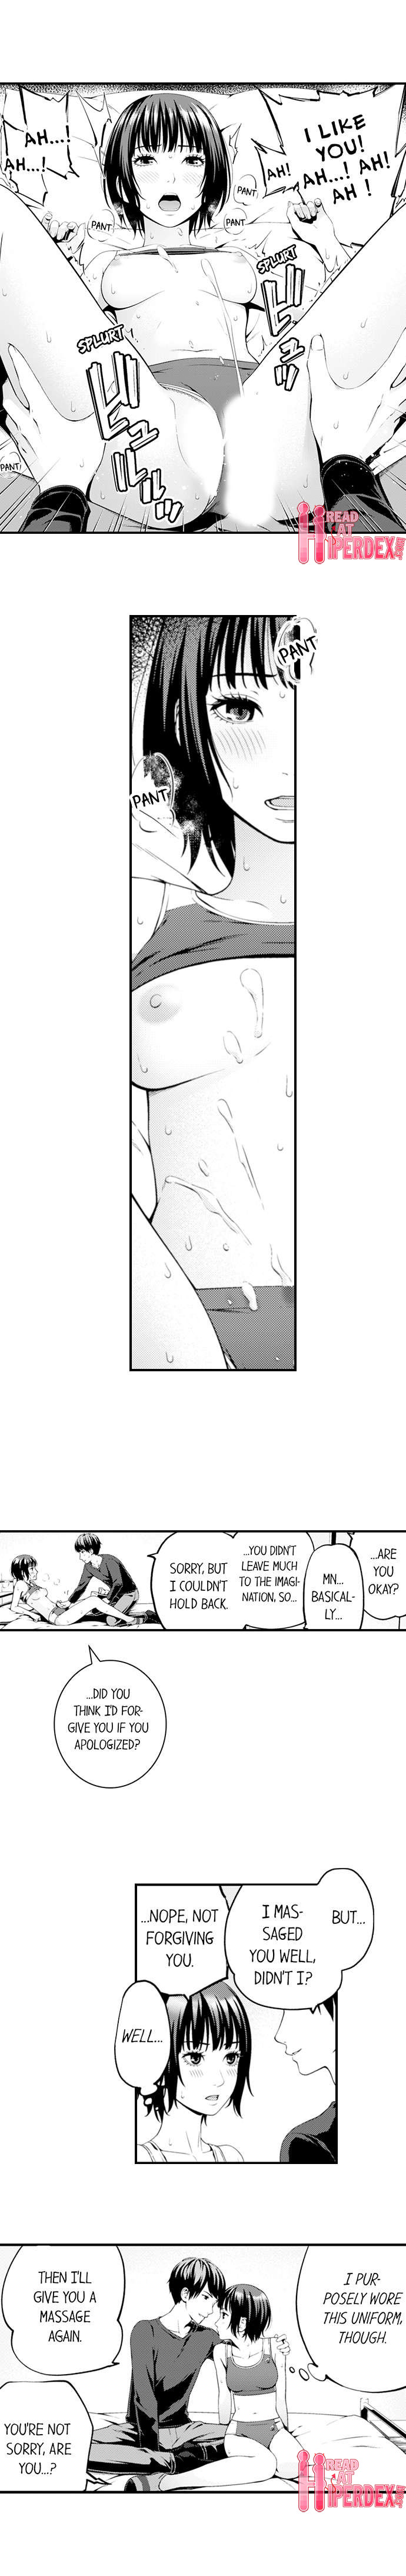 The Massage ♂♀ The Pleasure of Full Course Sex - Chapter 5 Page 9